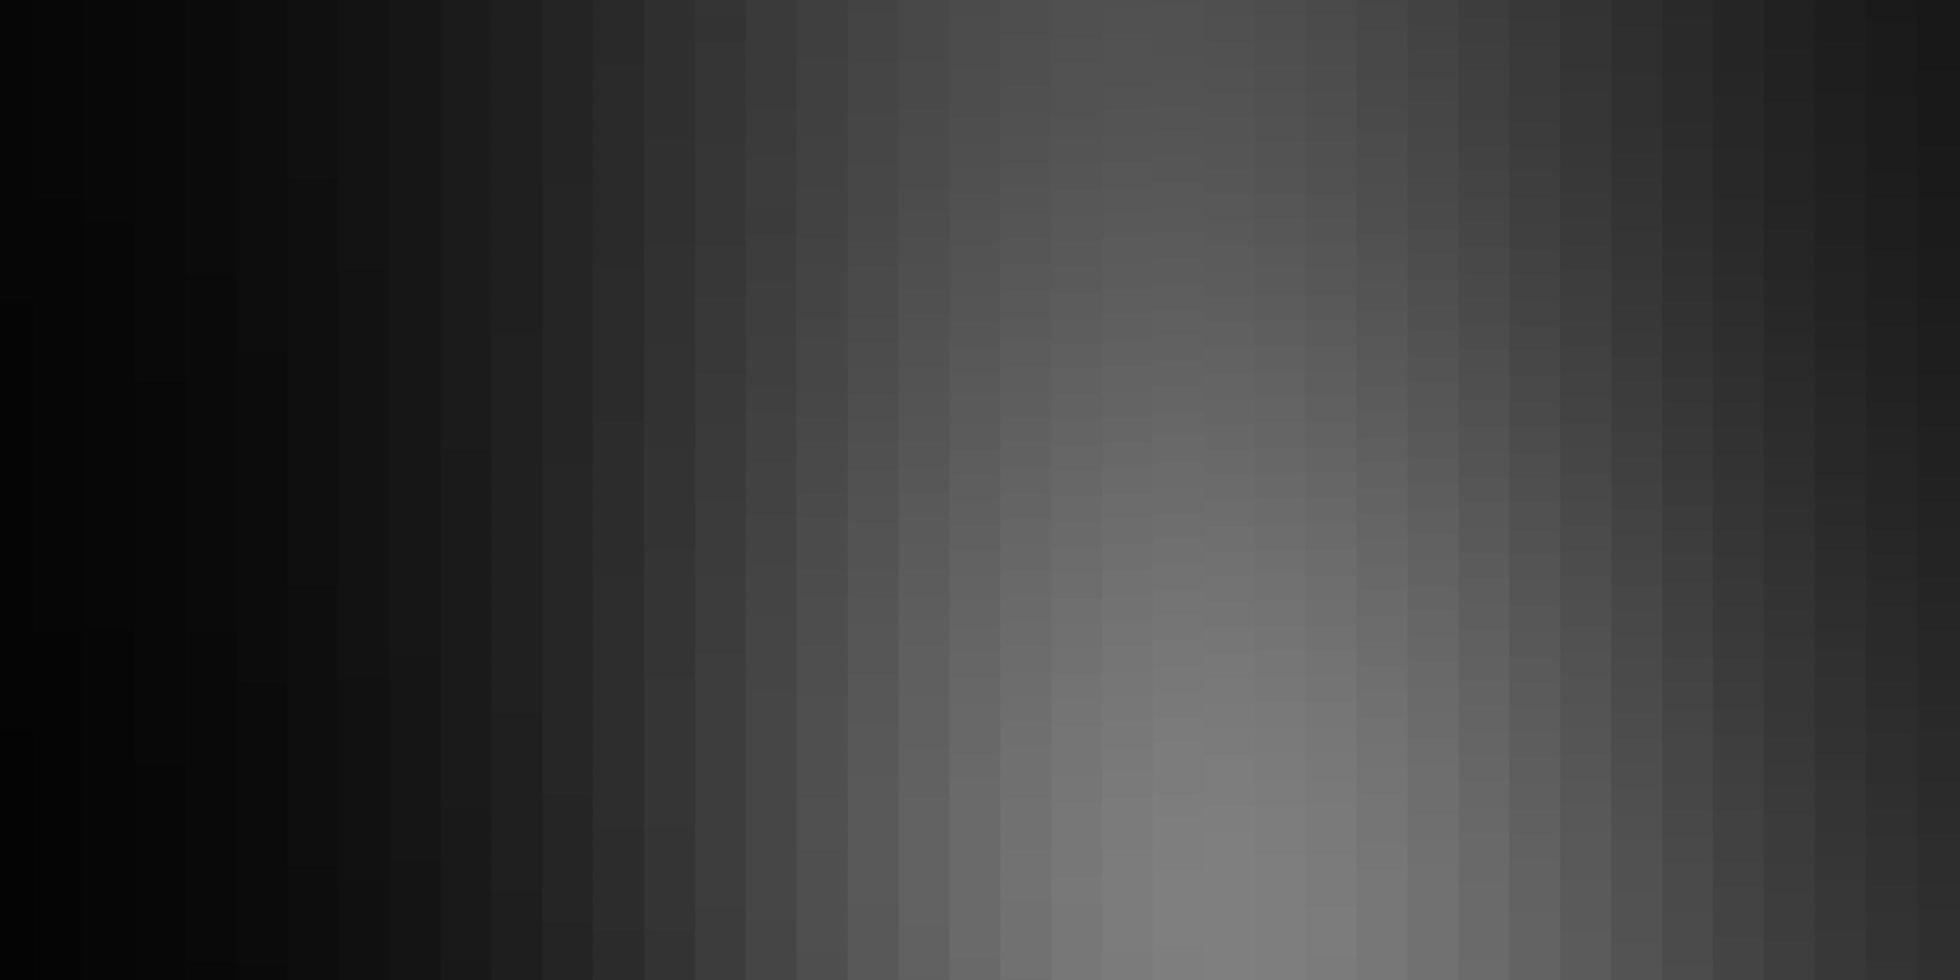 Light Gray vector background with rectangles Abstract gradient illustration with rectangles Pattern for websites landing pages